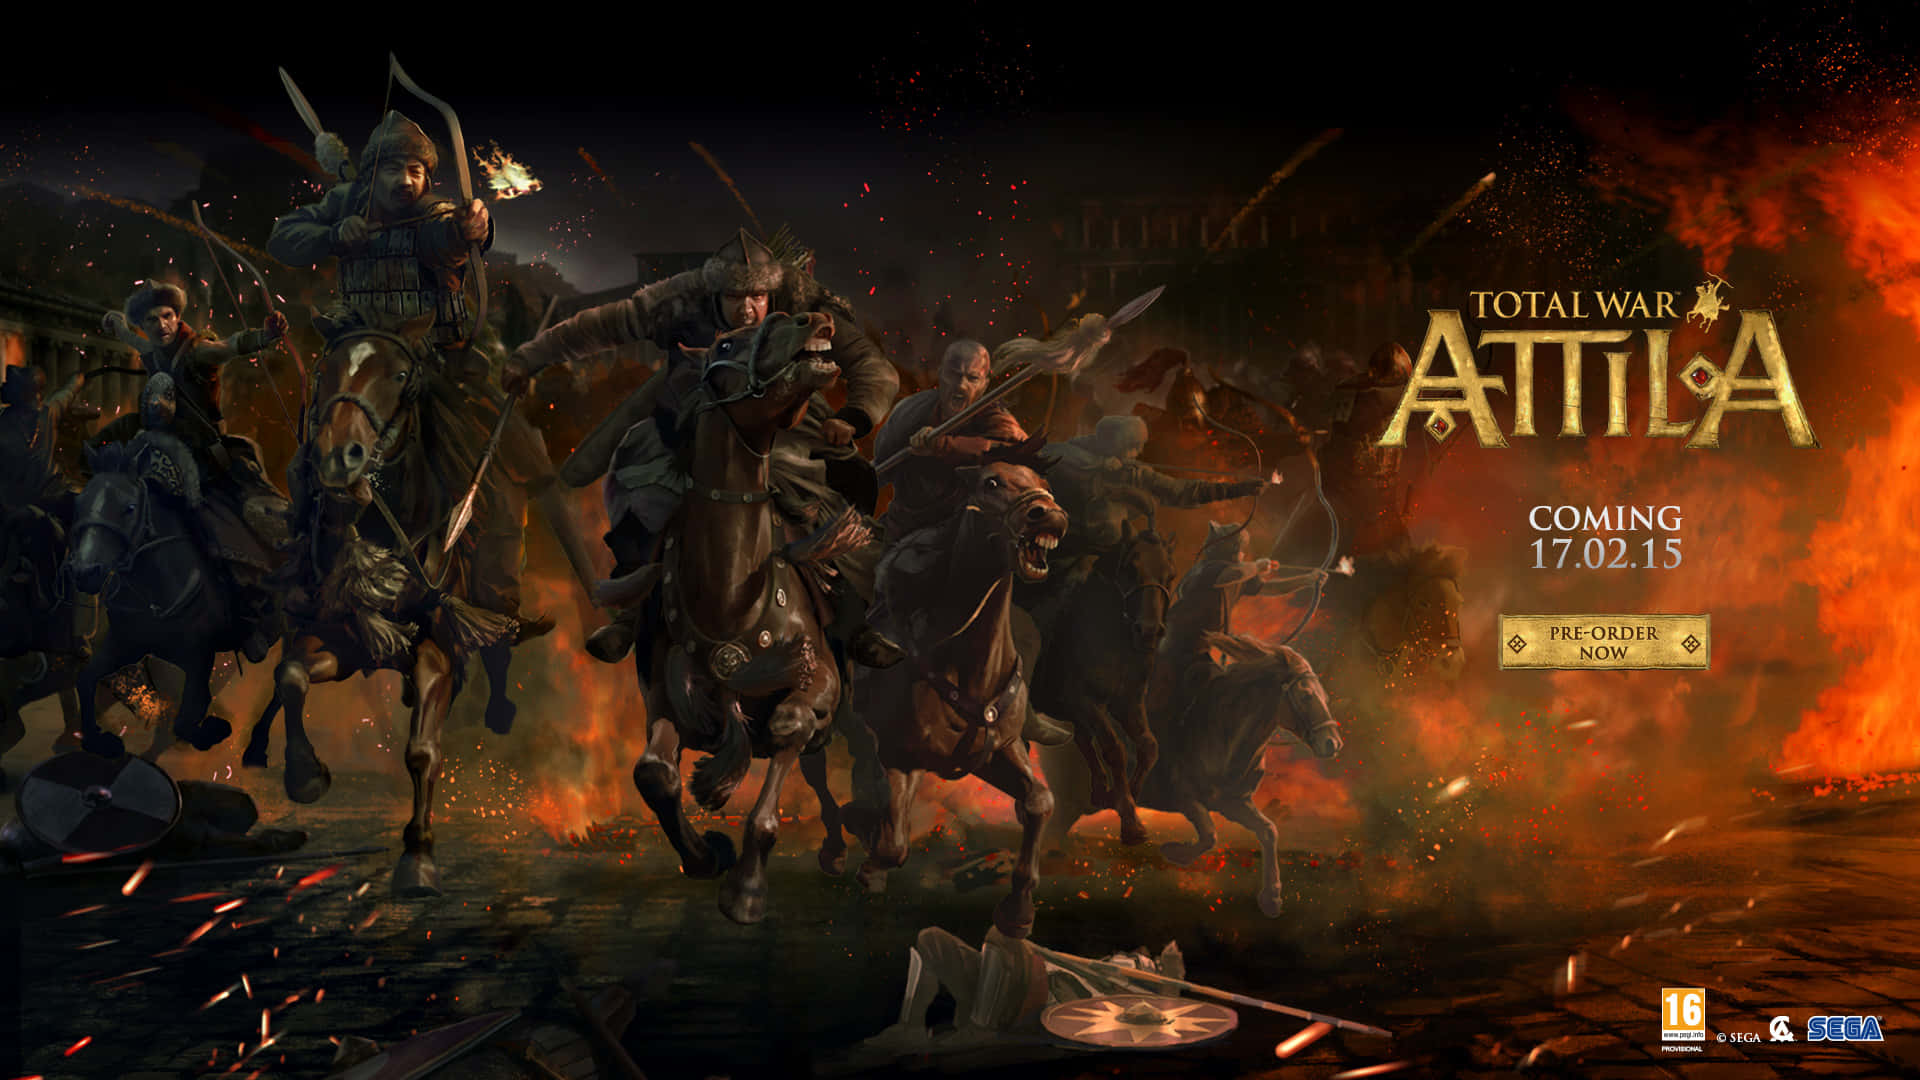 Experience the thrill of the military strategies of ancient times in Total War: Attila